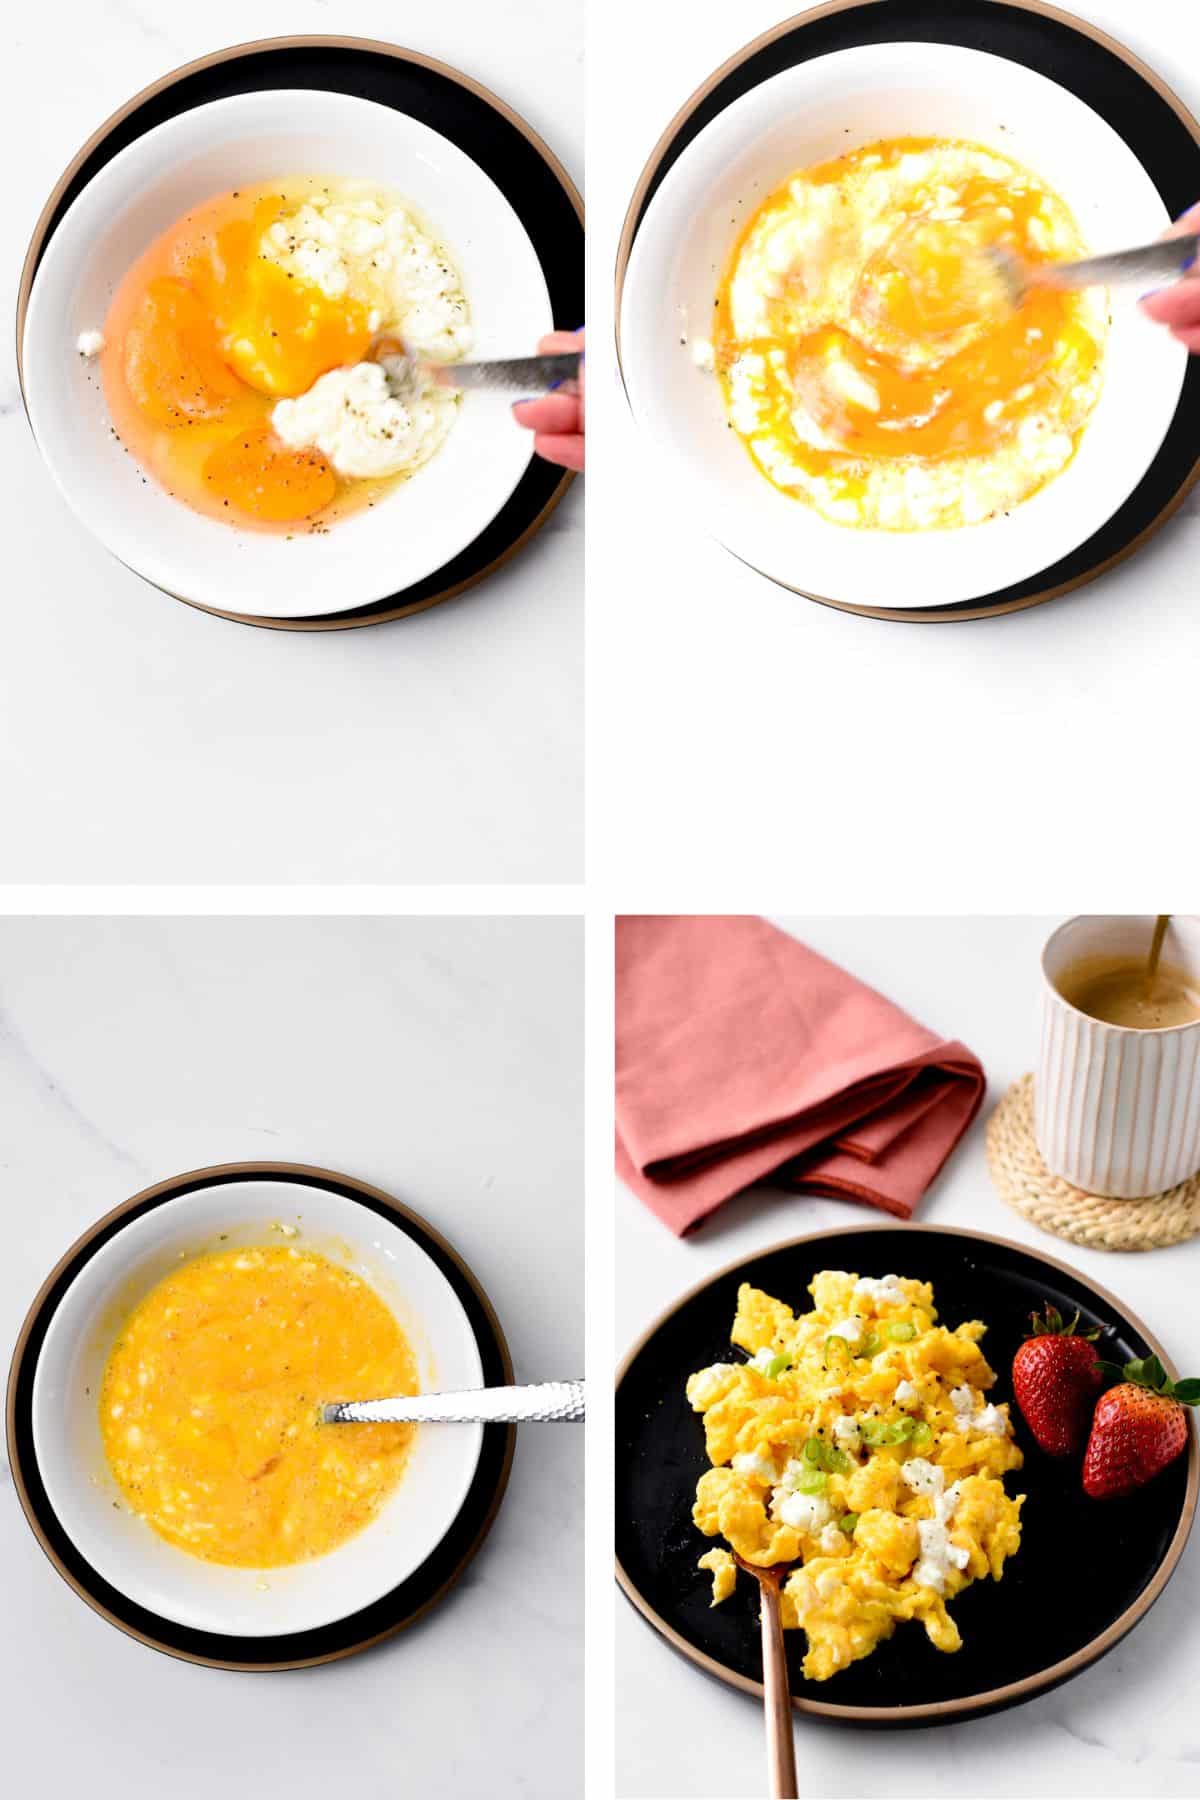 How to make Scrambled Eggs with Cottage Cheese